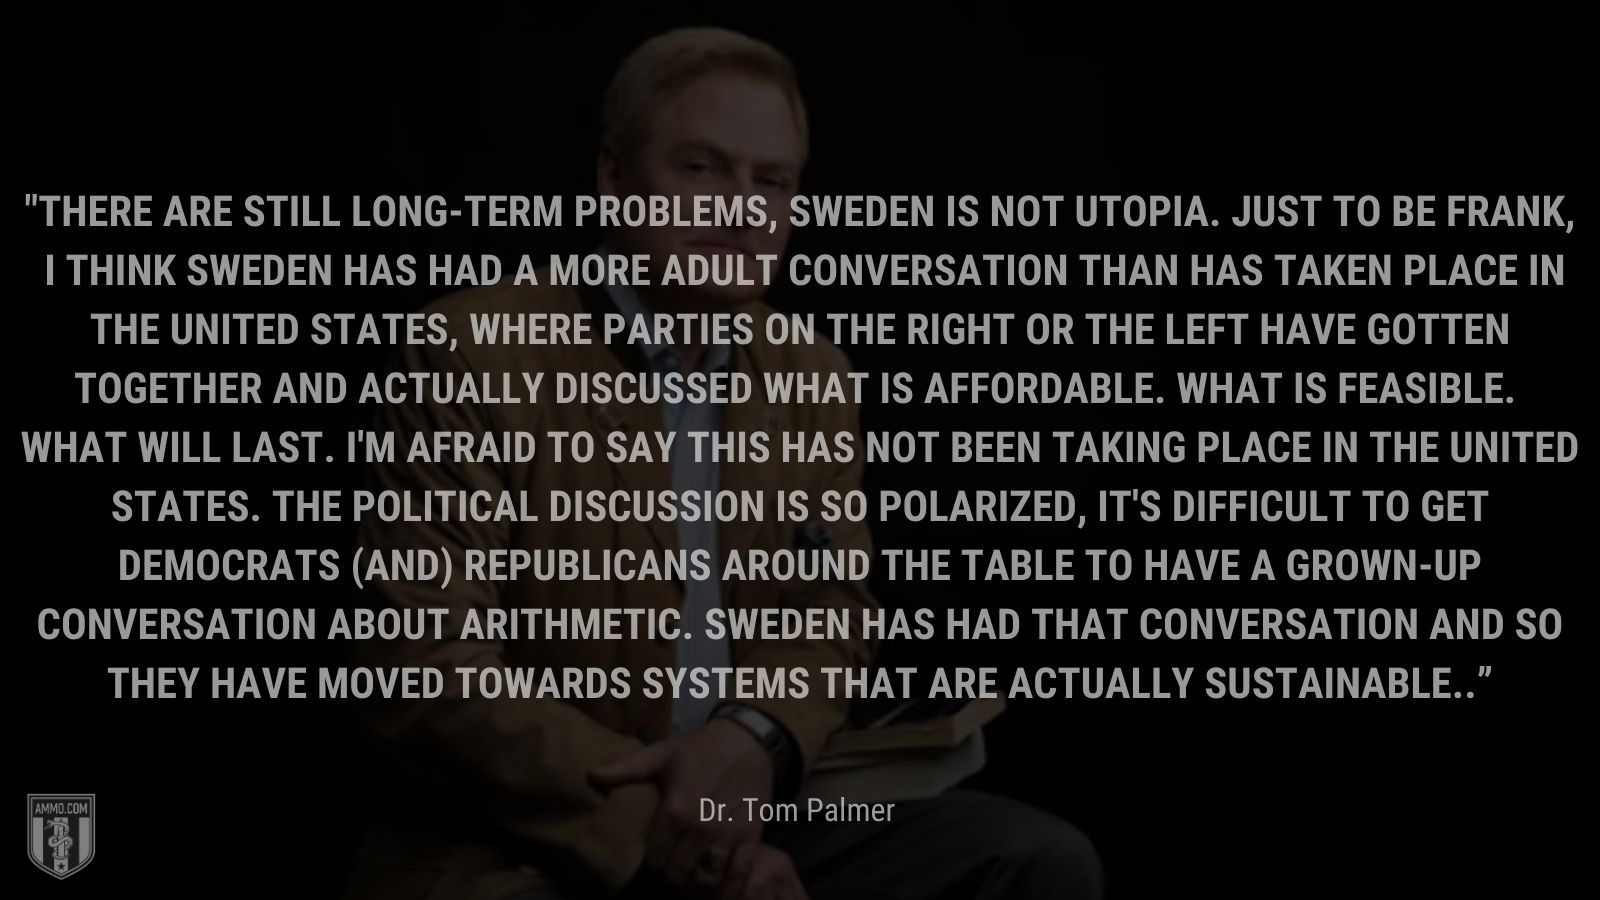 “There are still long-term problems, Sweden is not Utopia. Just to be frank, I think Sweden has had a more adult conversation than has taken place in the United States, where parties on the right or the left have gotten together and actually discussed what is affordable. What is feasible. What will last. I'm afraid to say this has not been taking place in the United States. The political discussion is so polarized, it's difficult to get Democrats (and) Republicans around the table to have a grown-up conversation about arithmetic. Sweden has had that conversation and so they have moved towards systems that are actually sustainable.” - Dr. Tom Palmer